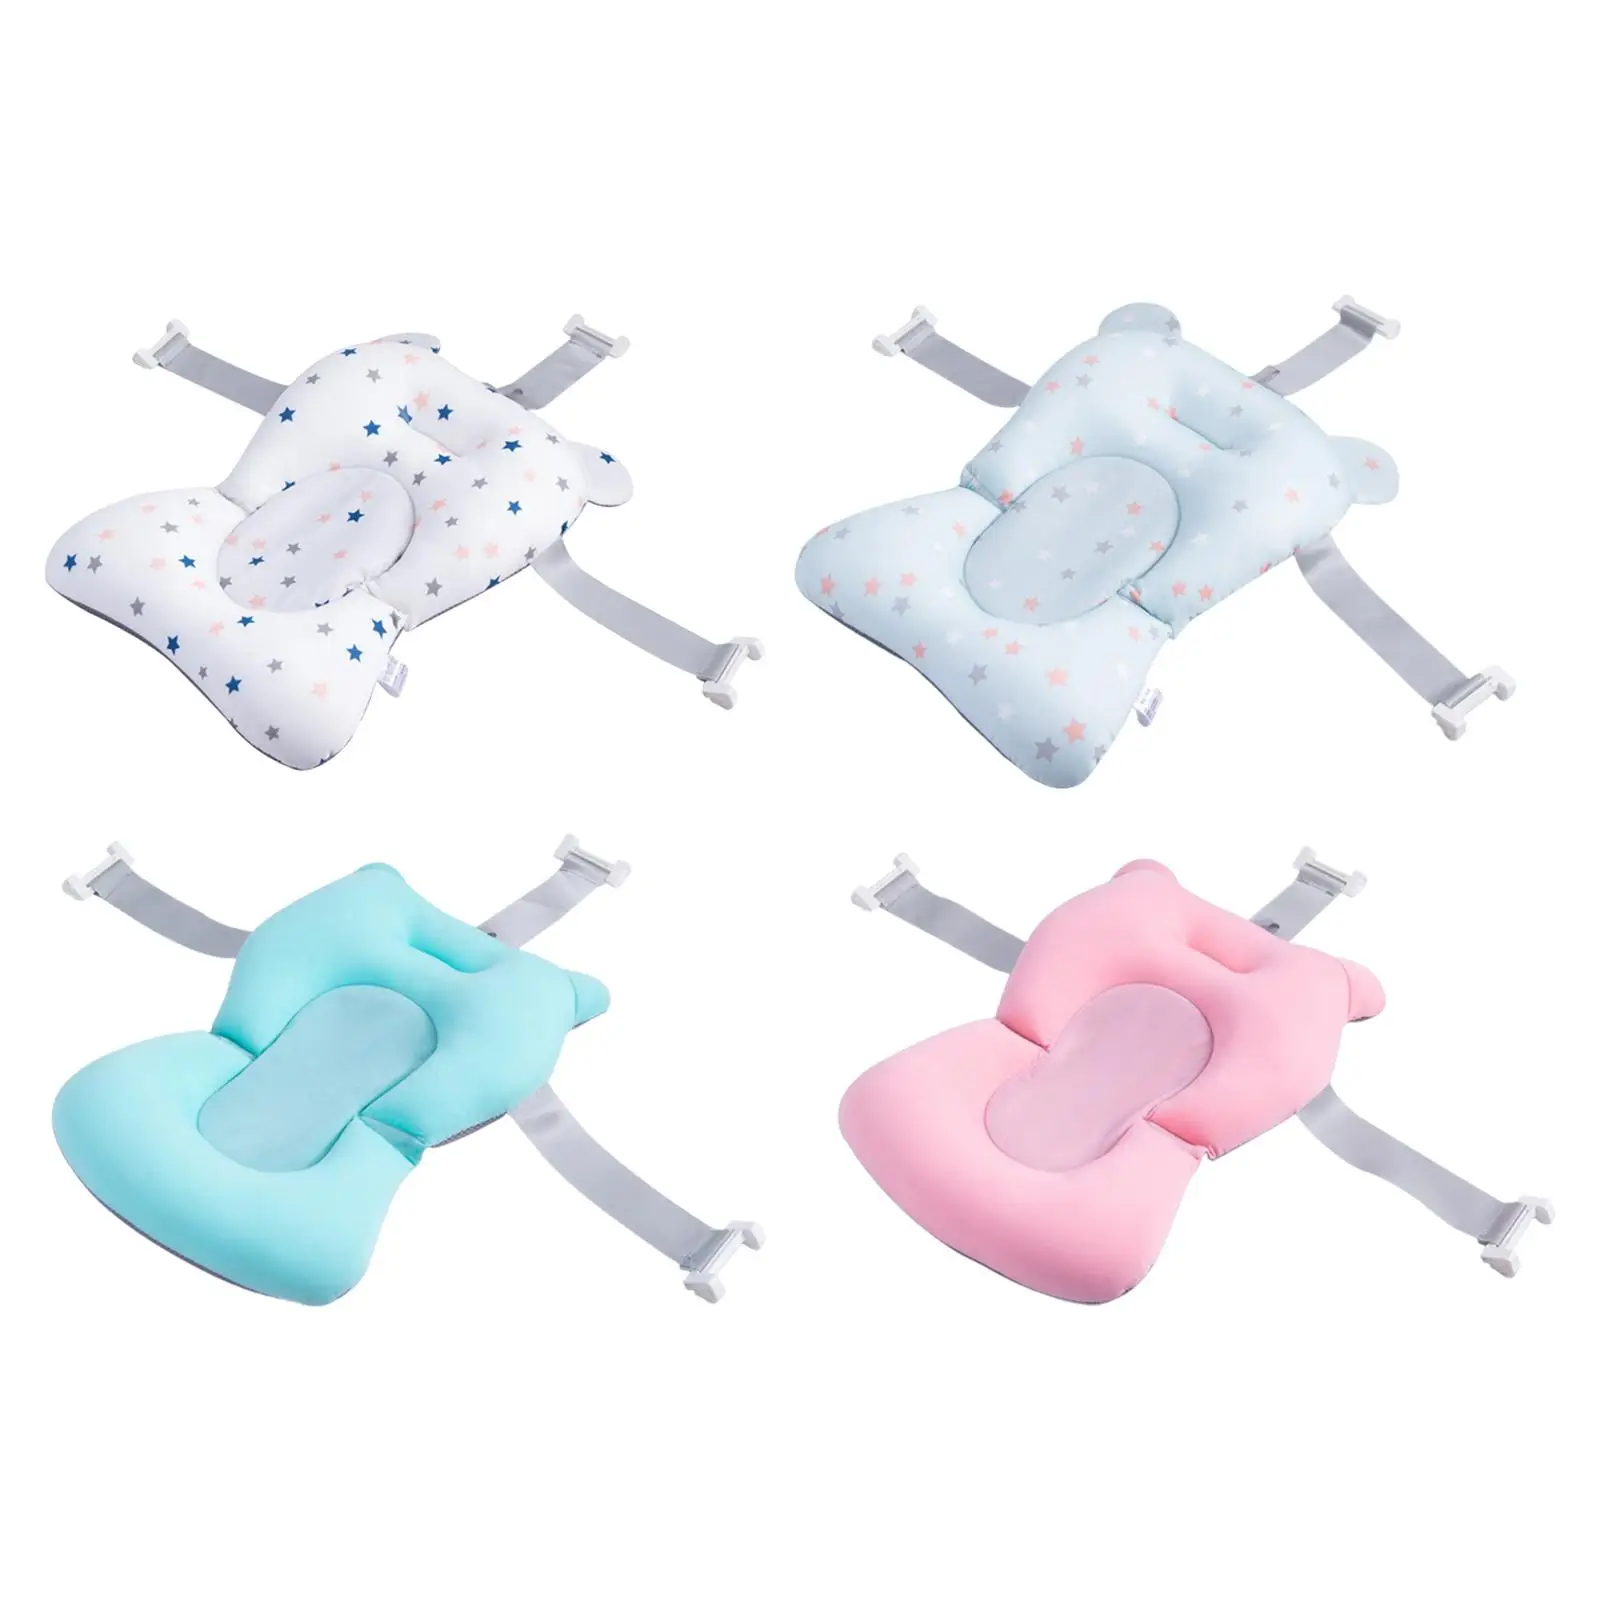 Foldable Baby Bath Tub Pad Anti-Slip Baby Shower Bath Tub Pad Baby Bath Pillow Foldable Soft Pillow for 0-6 Months Babies